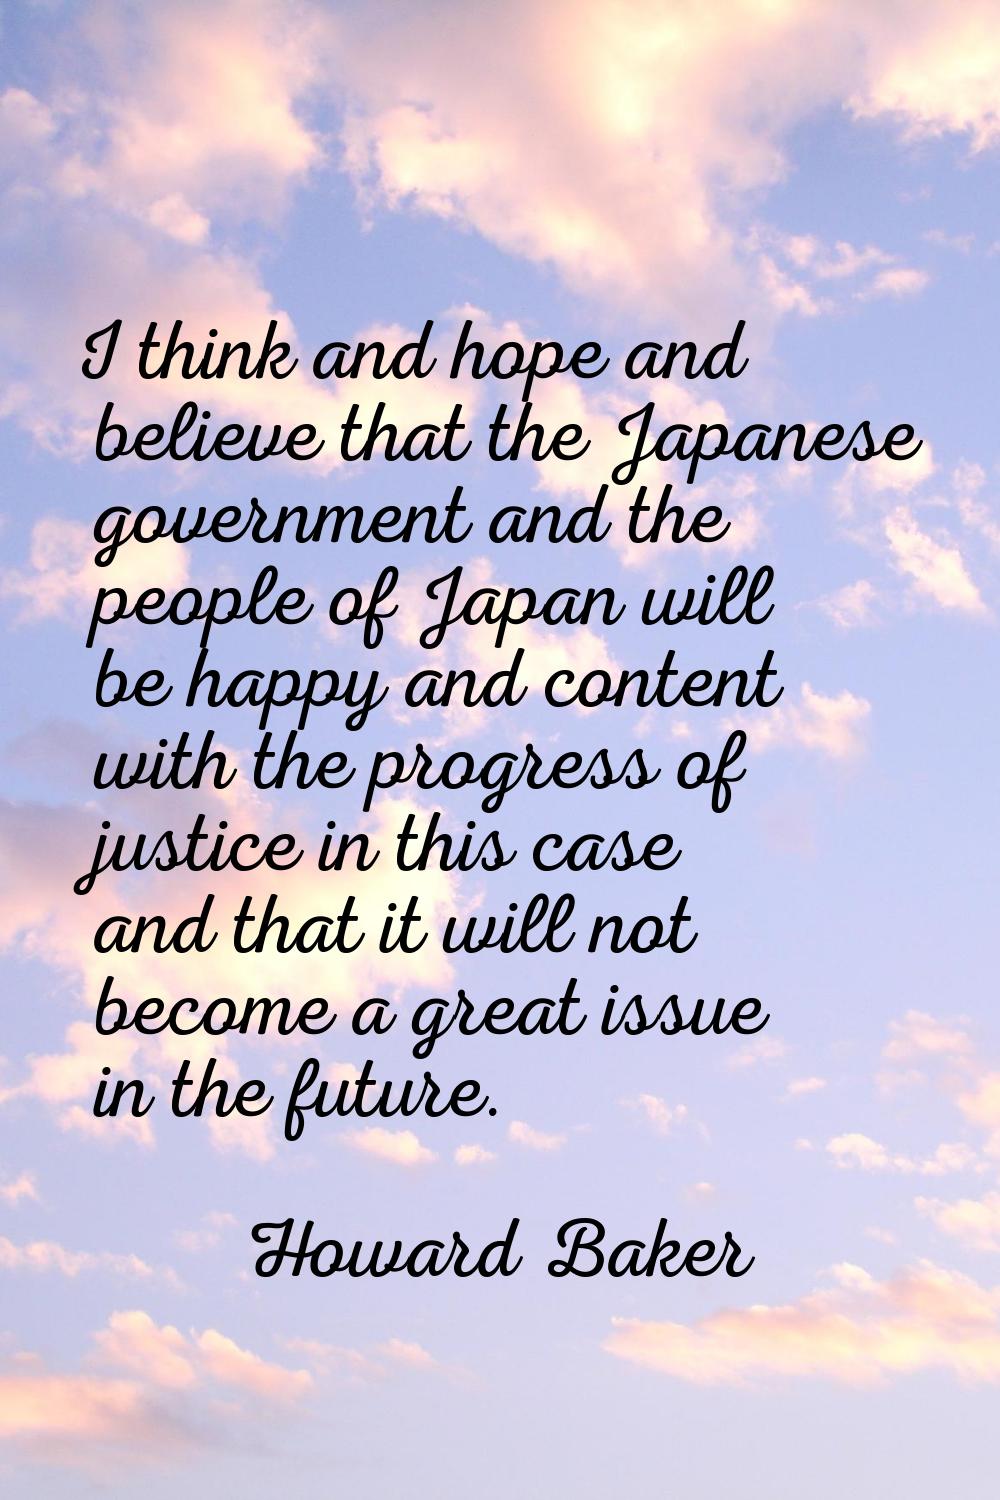 I think and hope and believe that the Japanese government and the people of Japan will be happy and